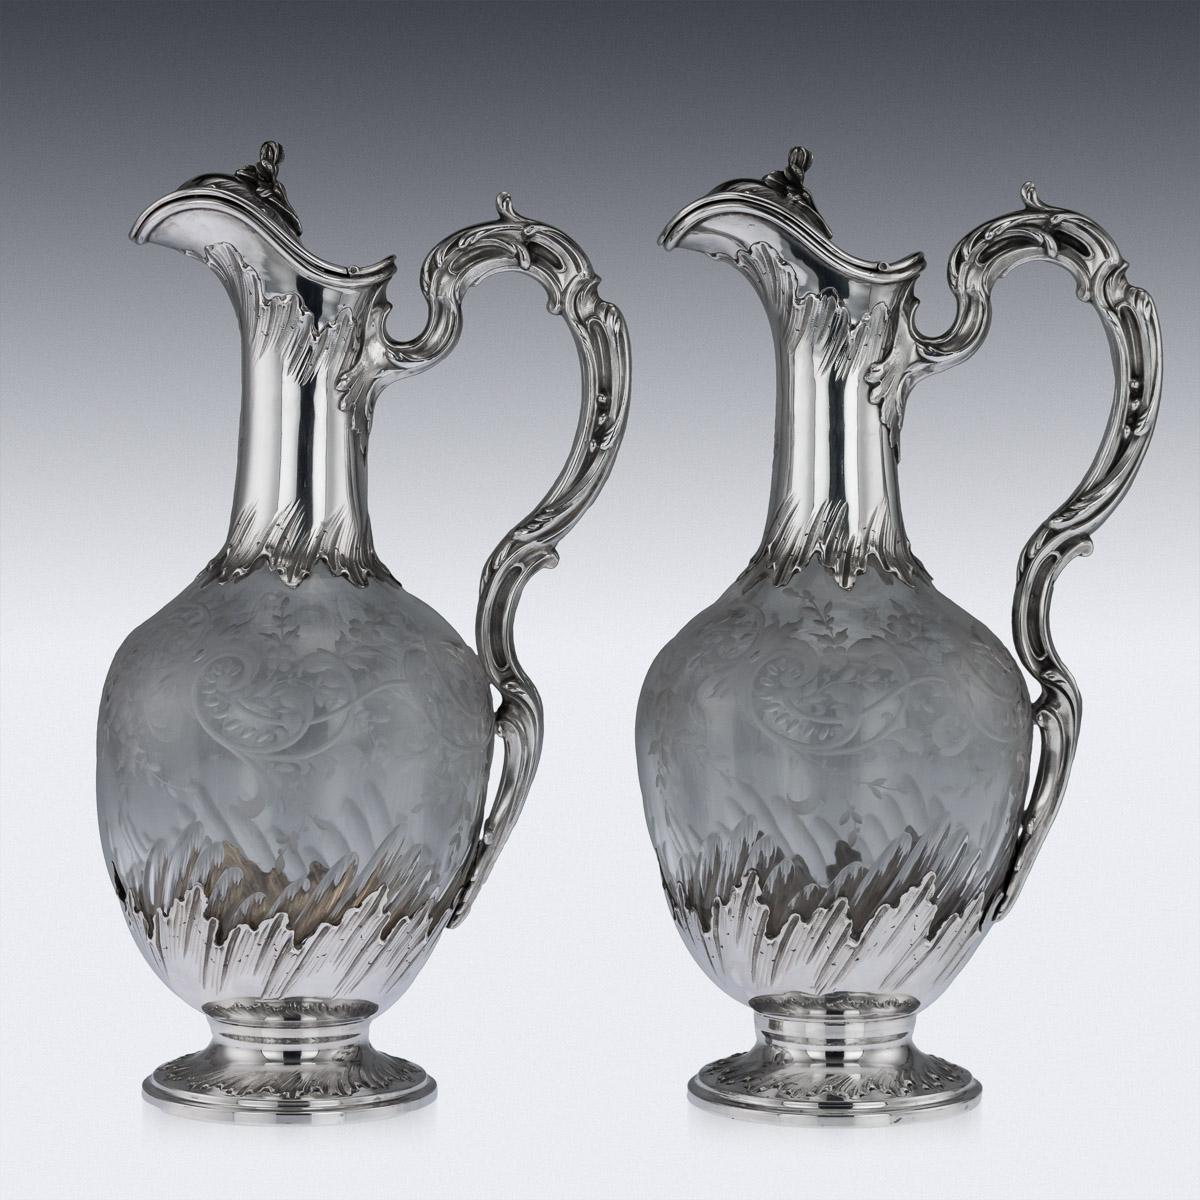 Antique late 19th century French solid silver and glass pair of claret jugs, each body is baluster form, beautifully cut and etched, the silver foot, neck and handle are chased with leaves and scrolls, the hinged lid is surmounted by a cast floral